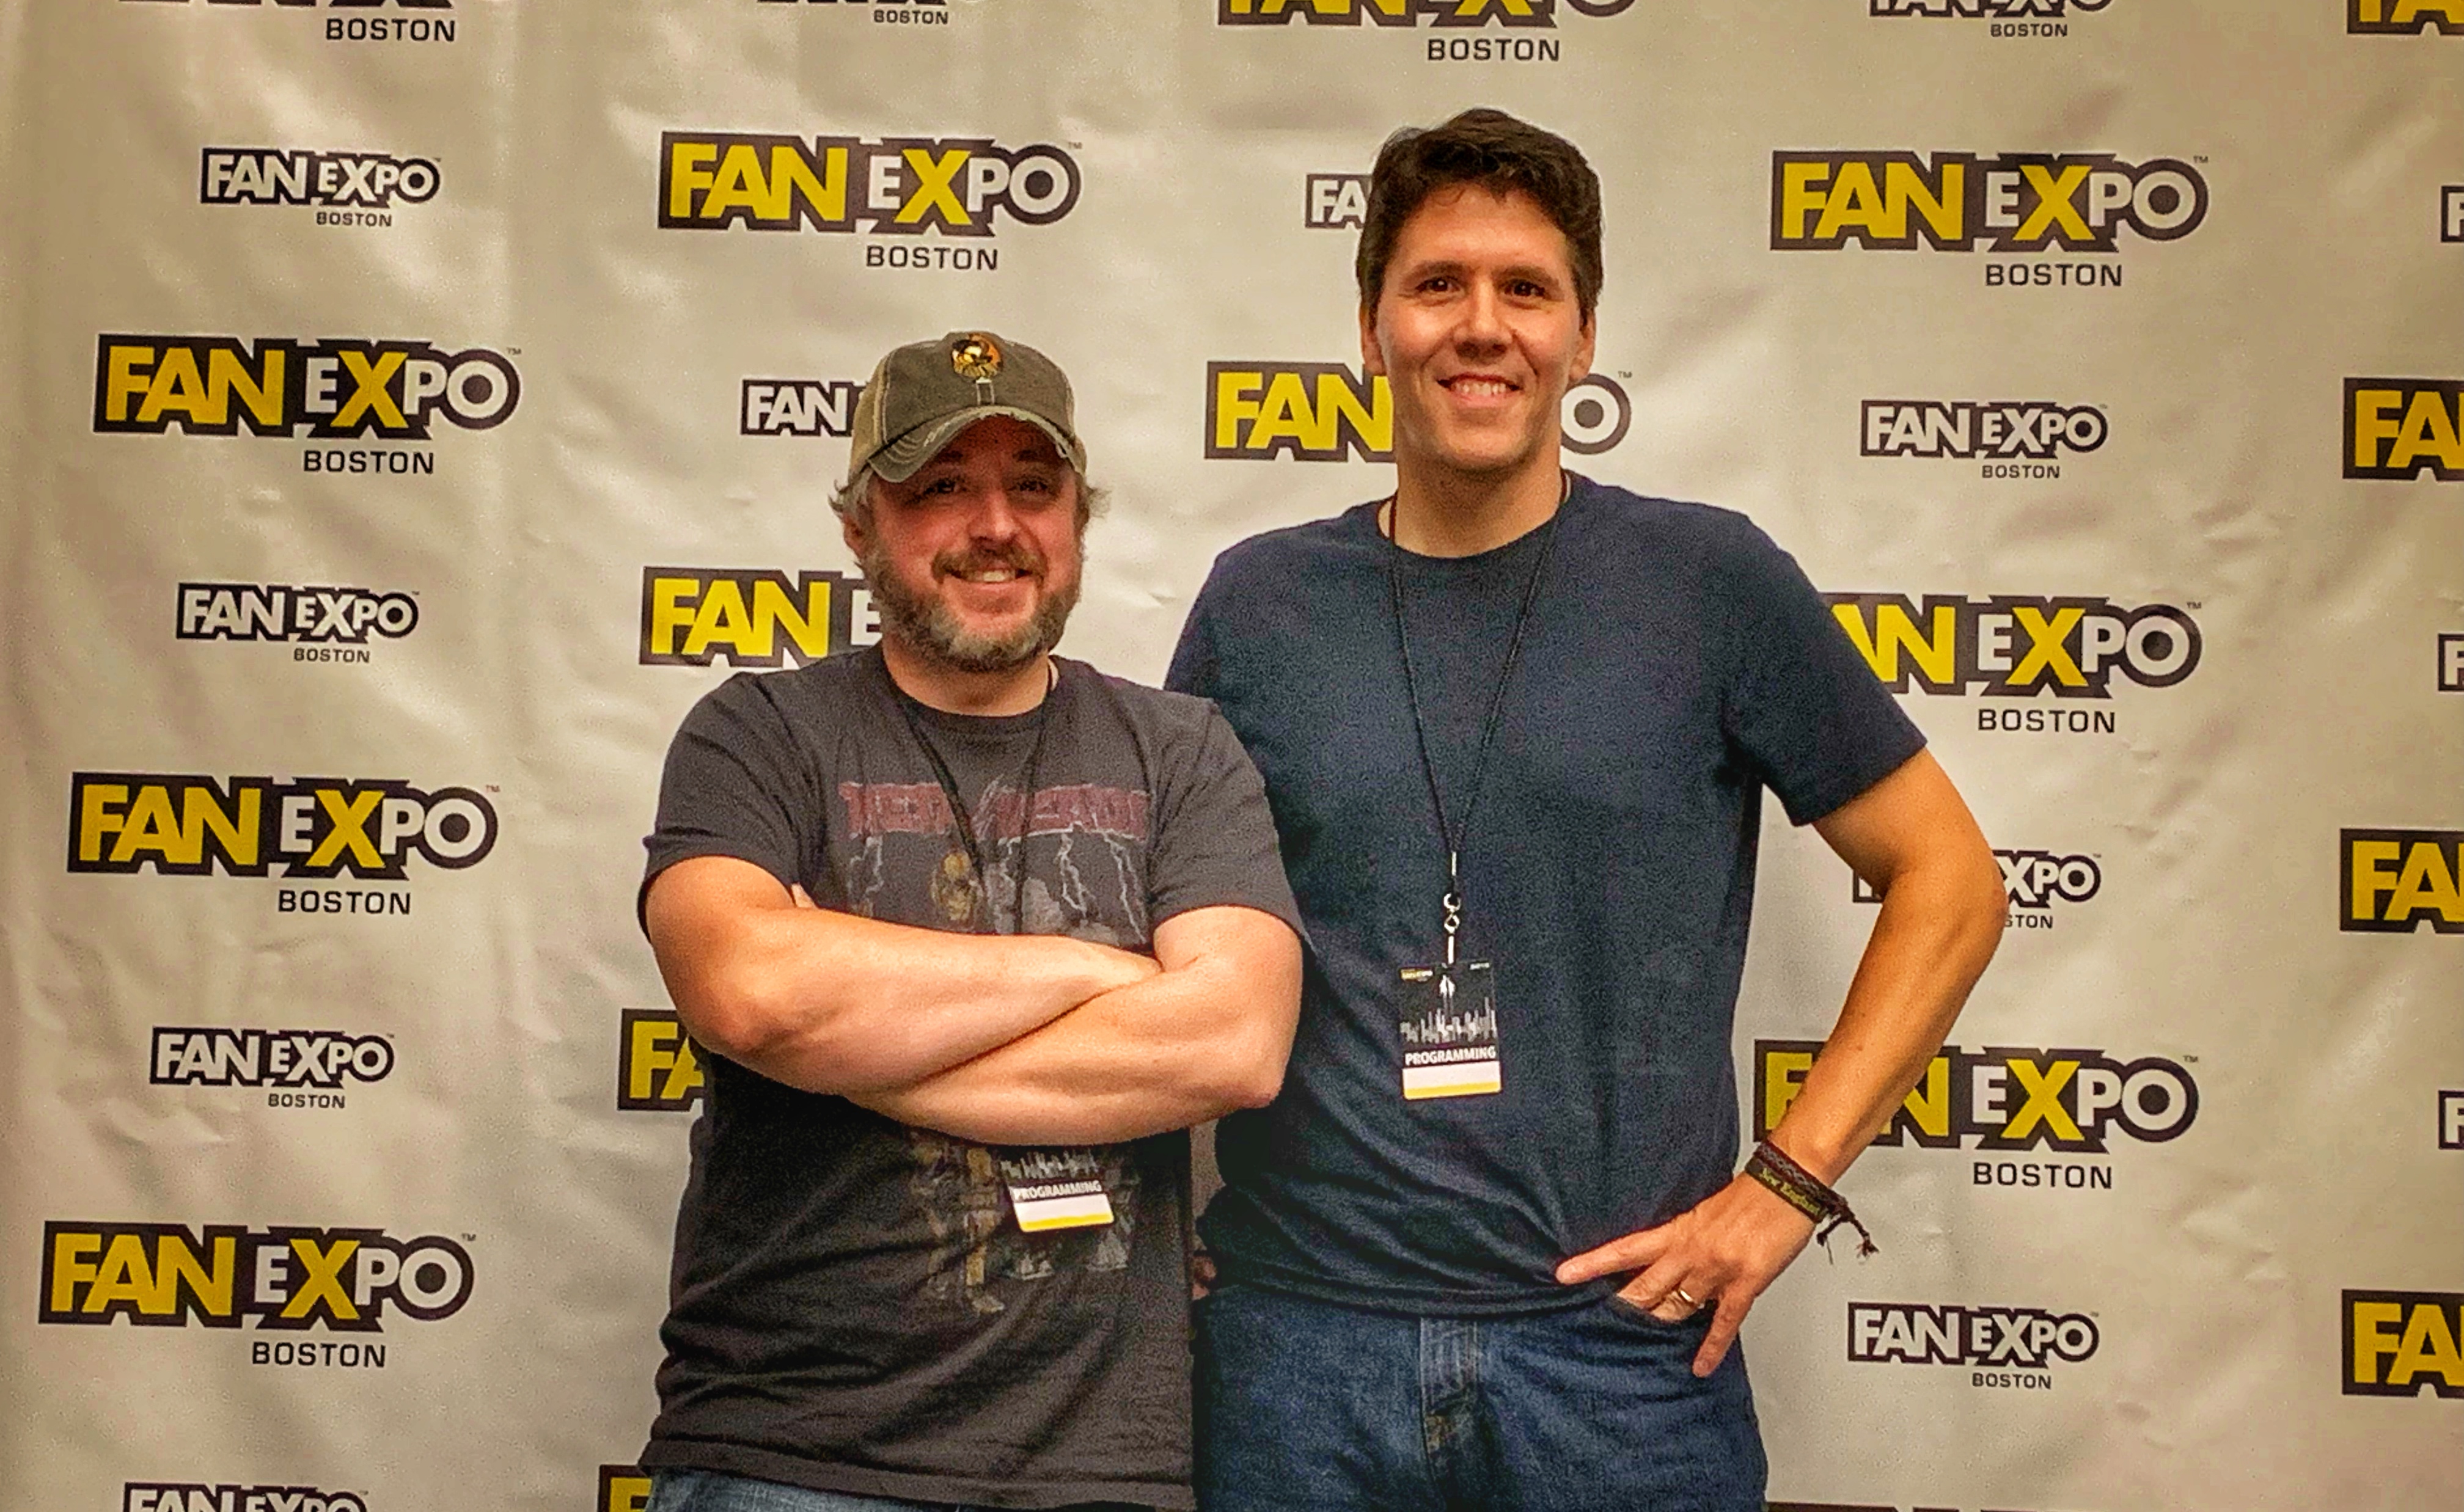 Ray Auger and Jeff Belanger speak at Boston's FanExpo 2019.